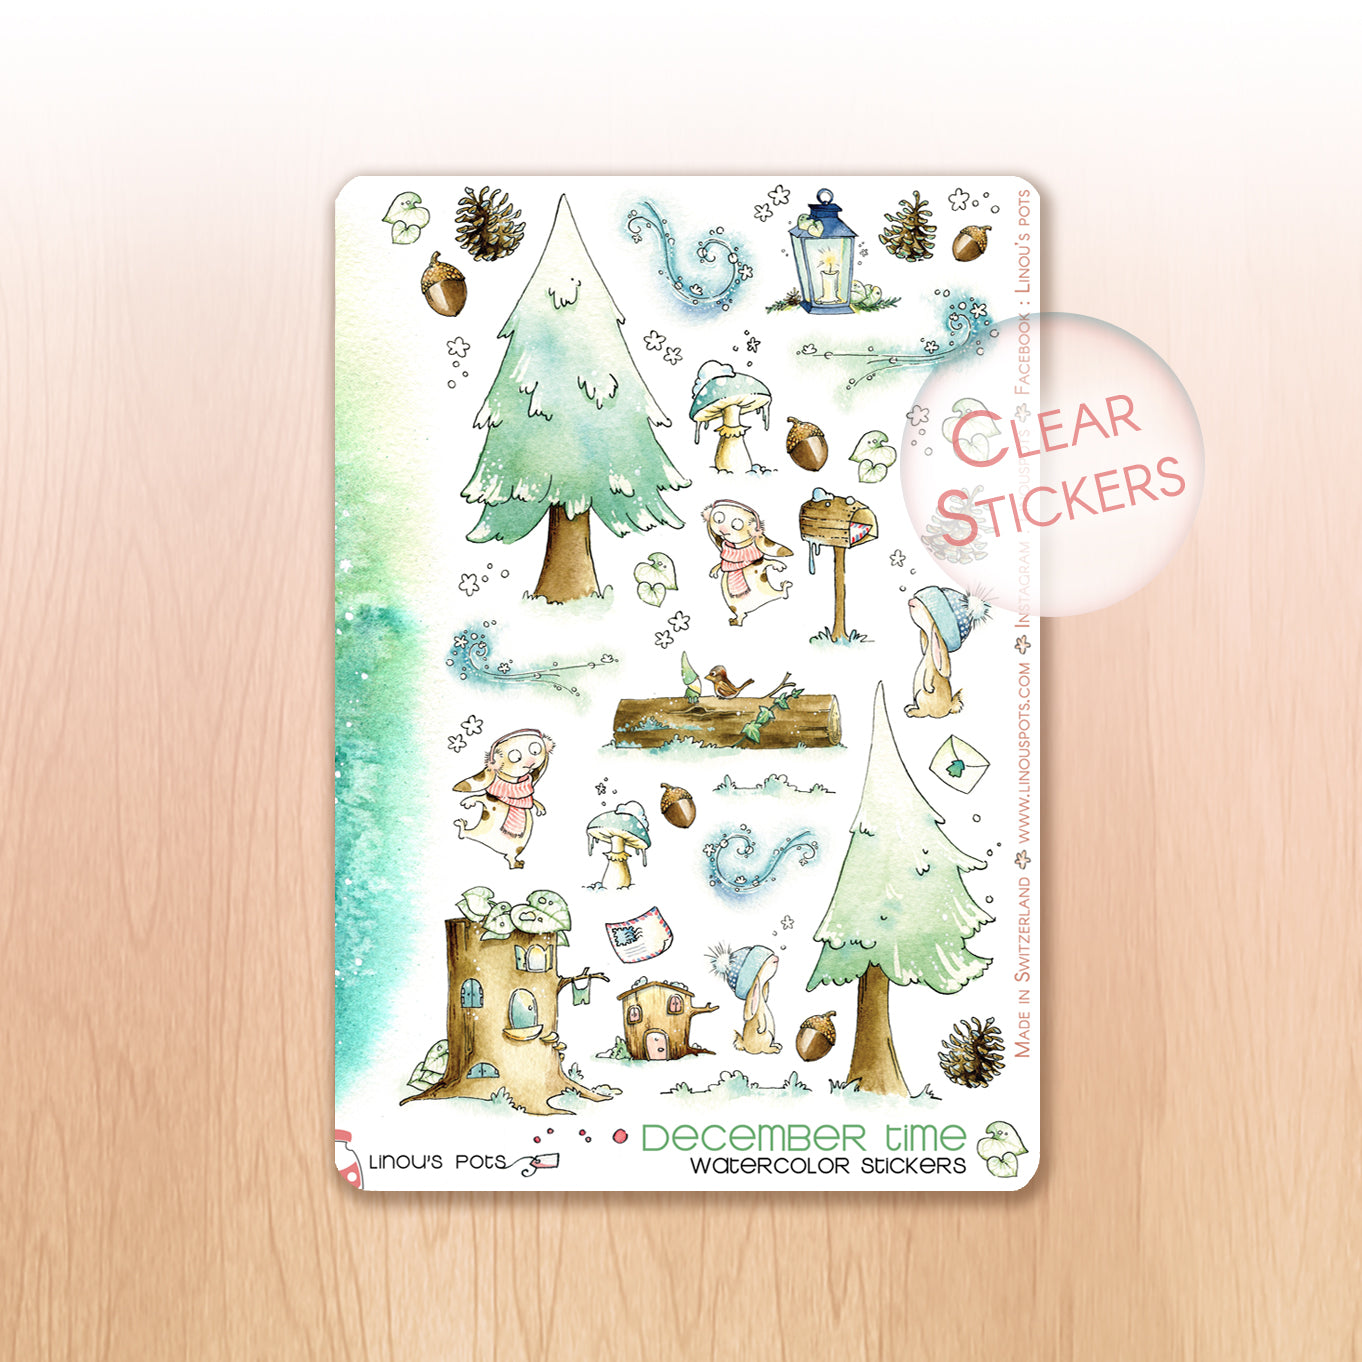 Watercolor planner stickers for Christmas with nature illustrations